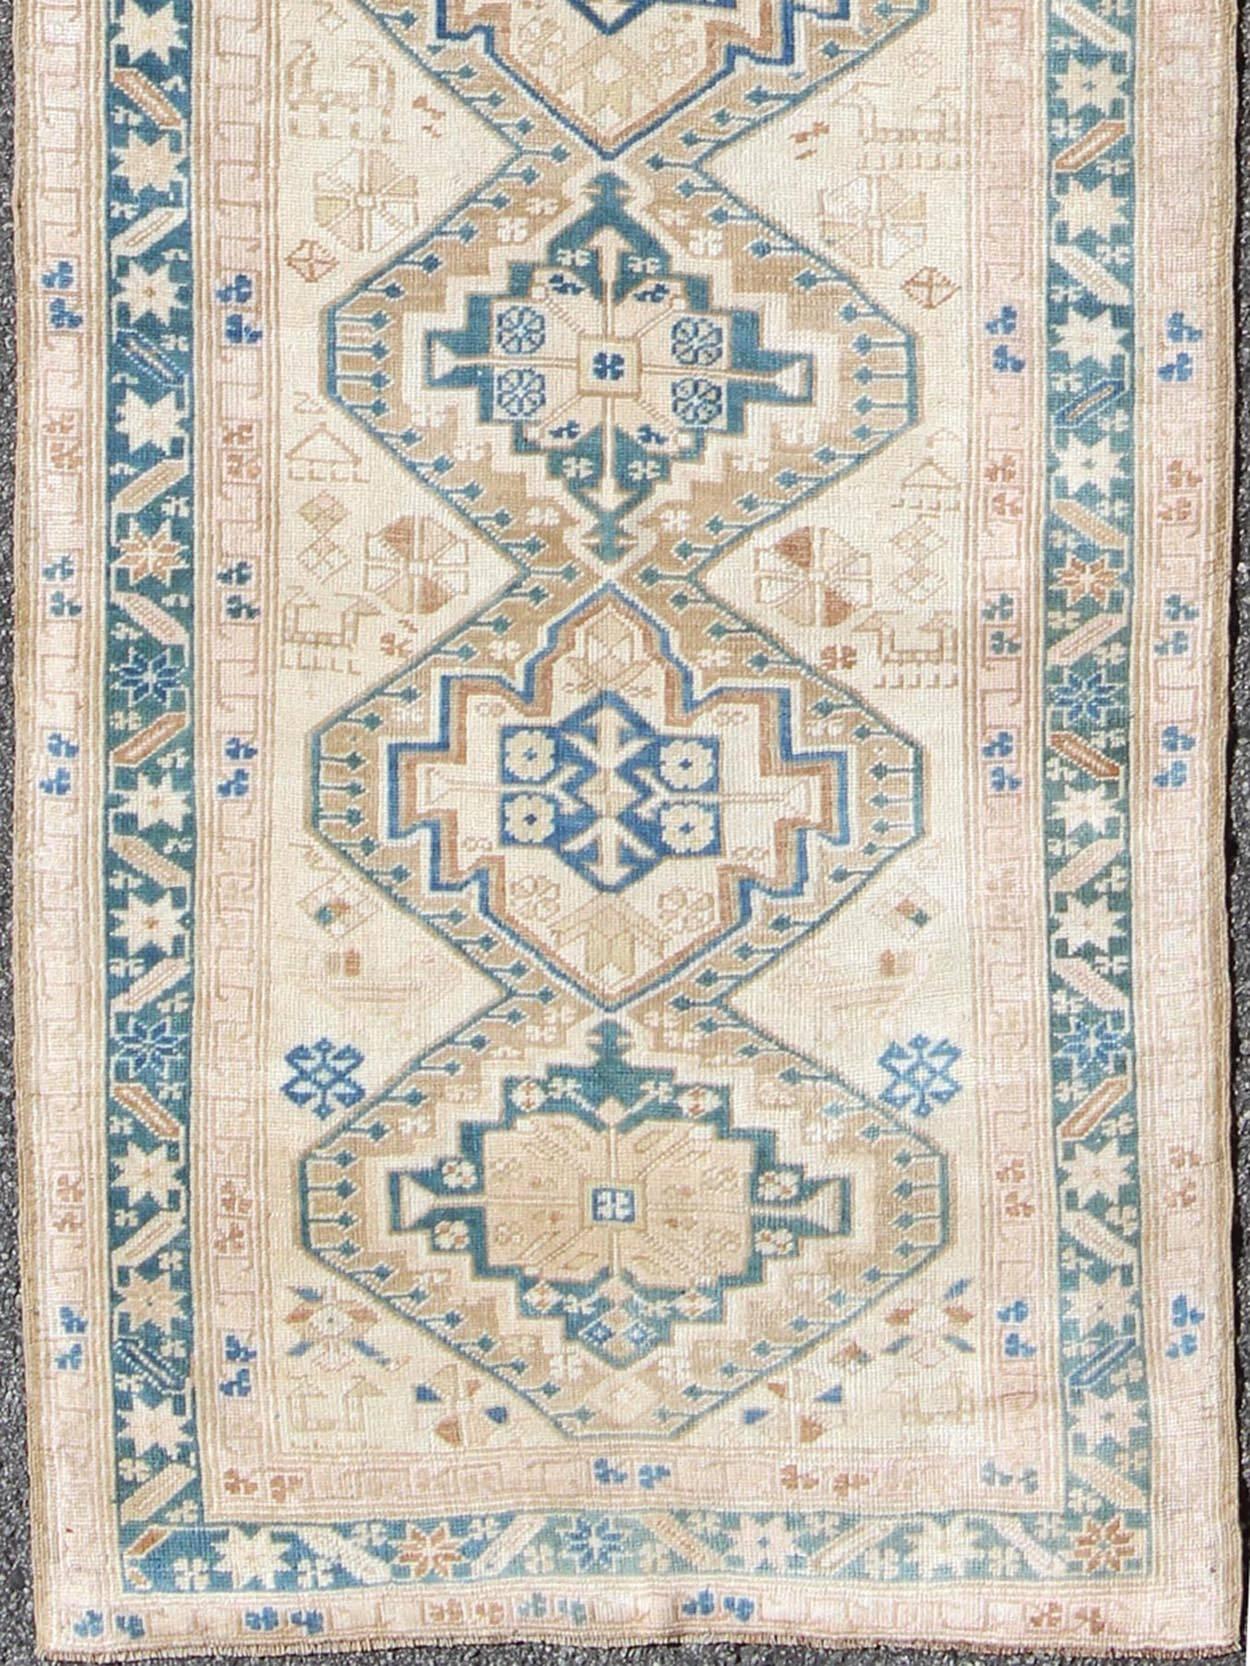 Stacked medallion antique Turkish Oushak rug in teal, ivory, cream and nude, rug na-981608, country of origin / type: Turkey / Oushak, circa 1920

This long antique Turkish gallery runner, circa 1920 features a unique blend of colors and an